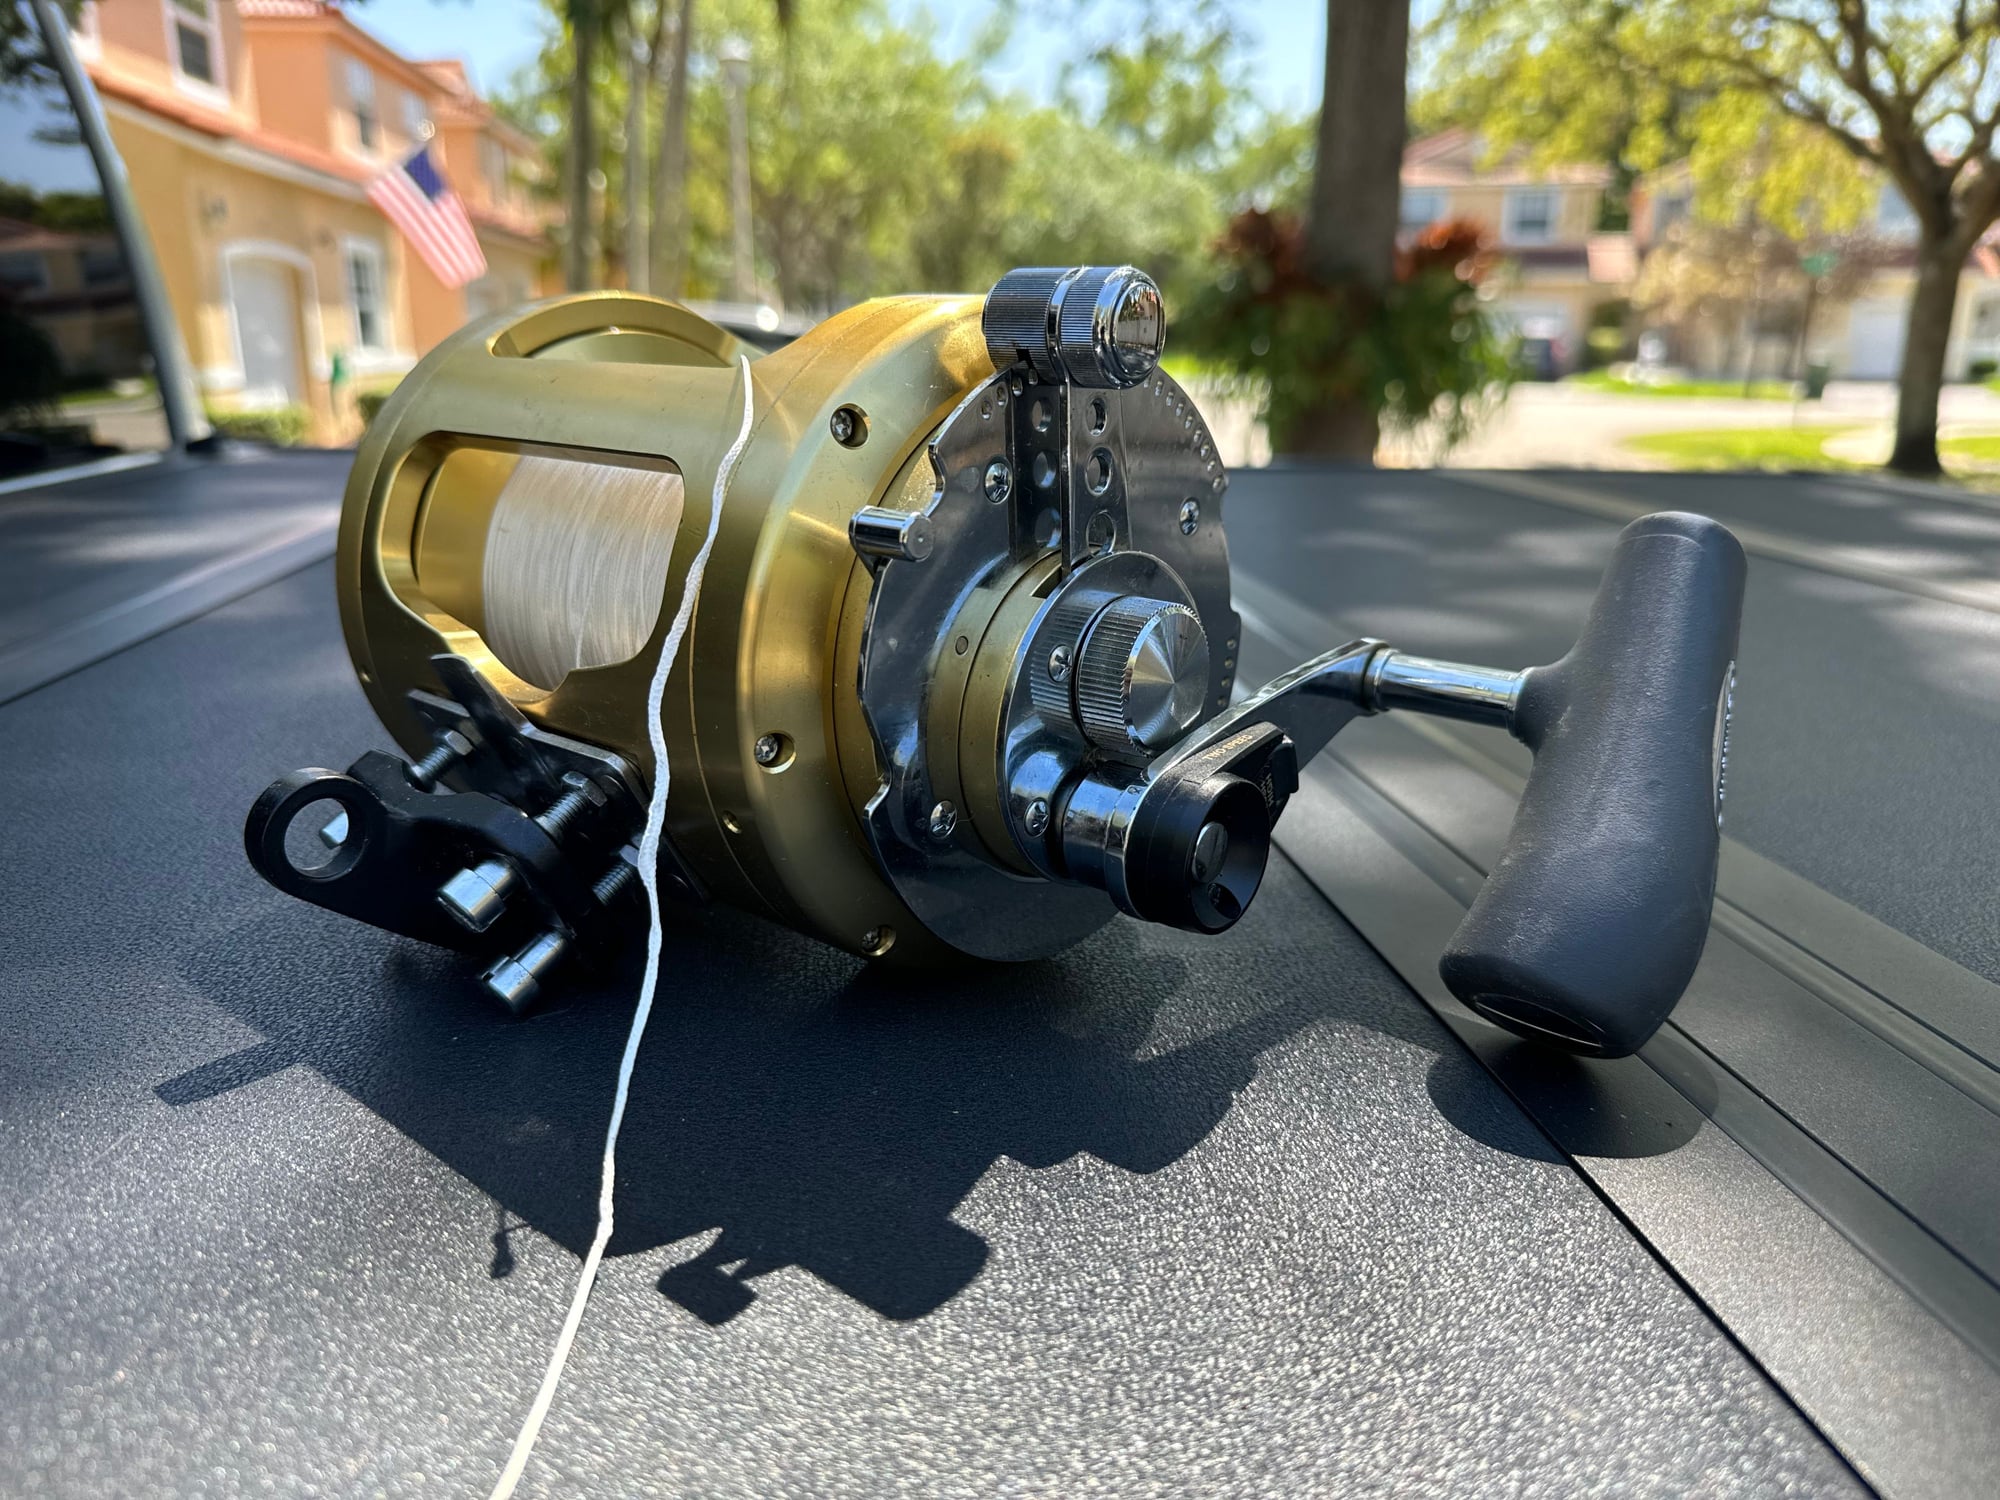 Shimano Tiagra 80. Barely used - The Hull Truth - Boating and